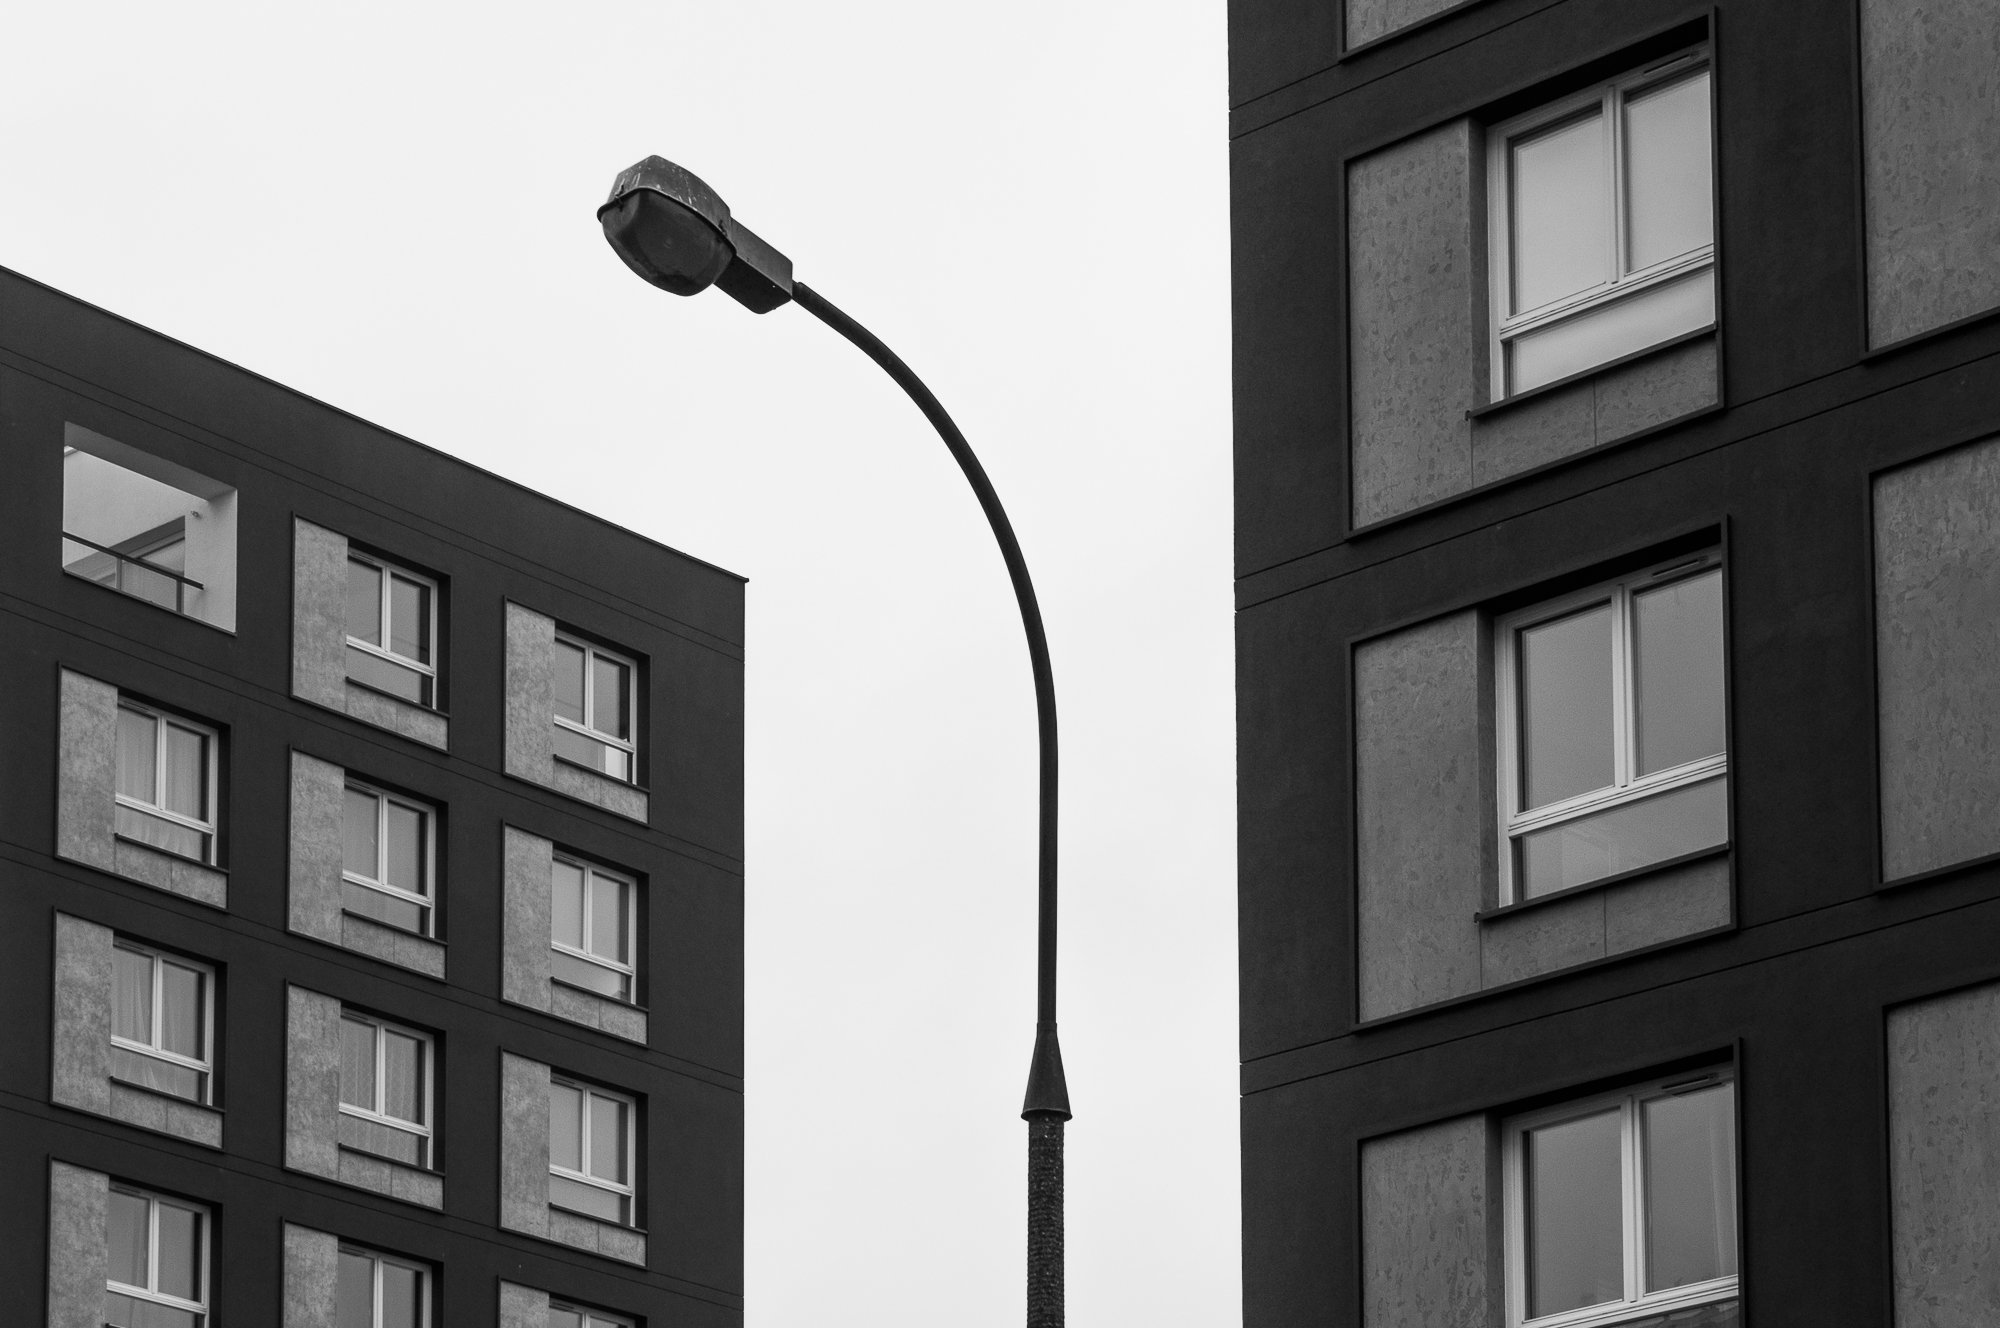 Adam Mazek Photography Warsaw 2021. Post: "Each subsequent day." Minimalism. Street lamp.